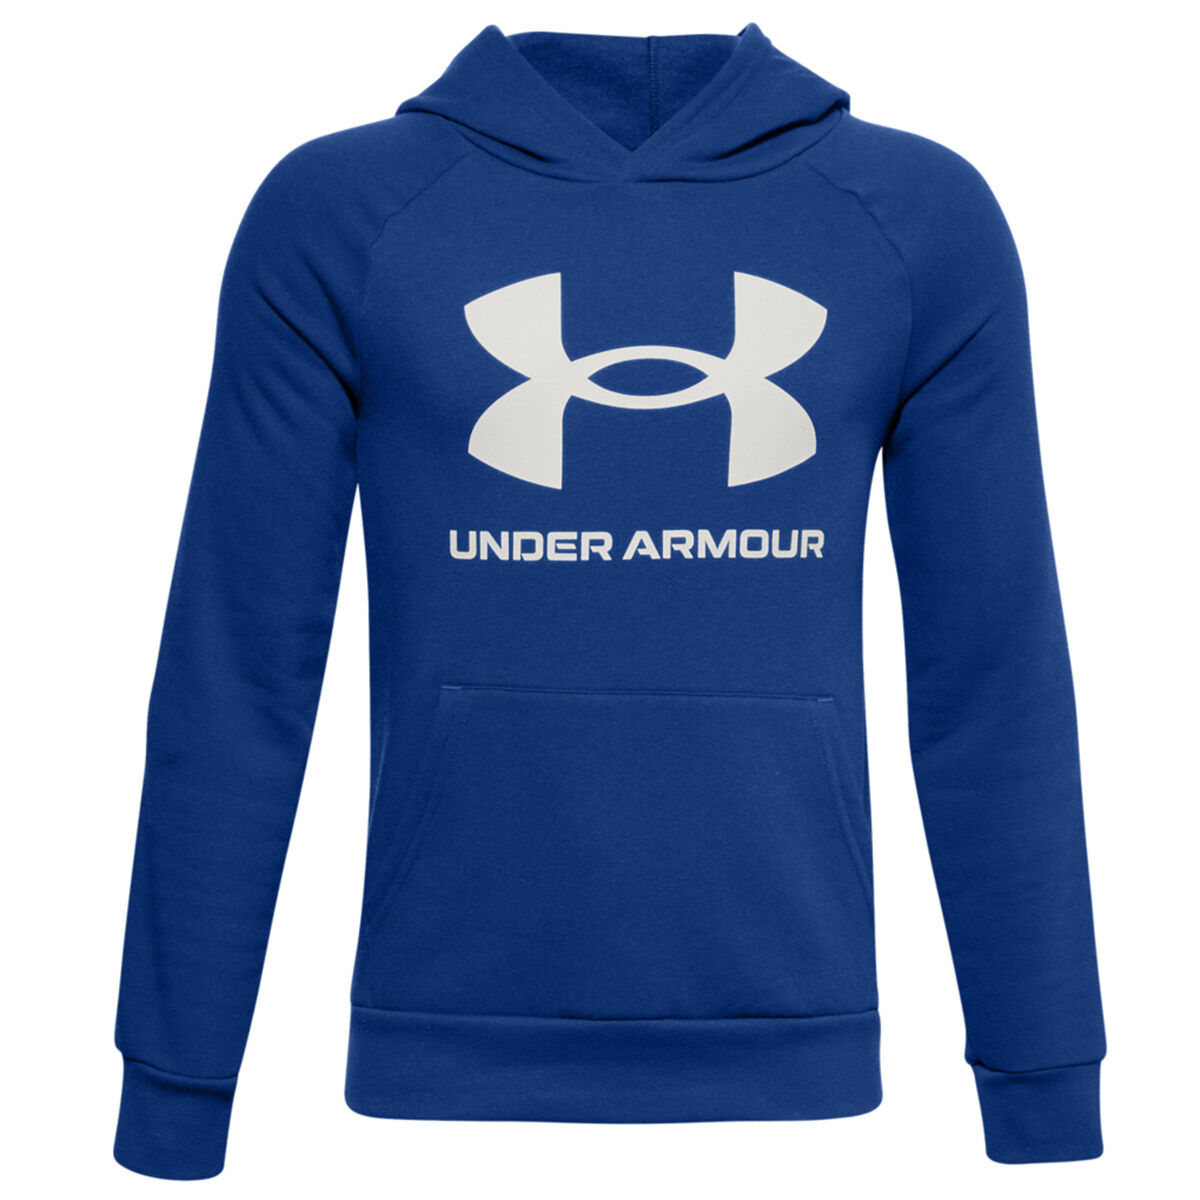 Under Armour Junior Rival Fleece Golf Hoodie, Unisex, Royal/onlyx white, 11-12 years | American Golf